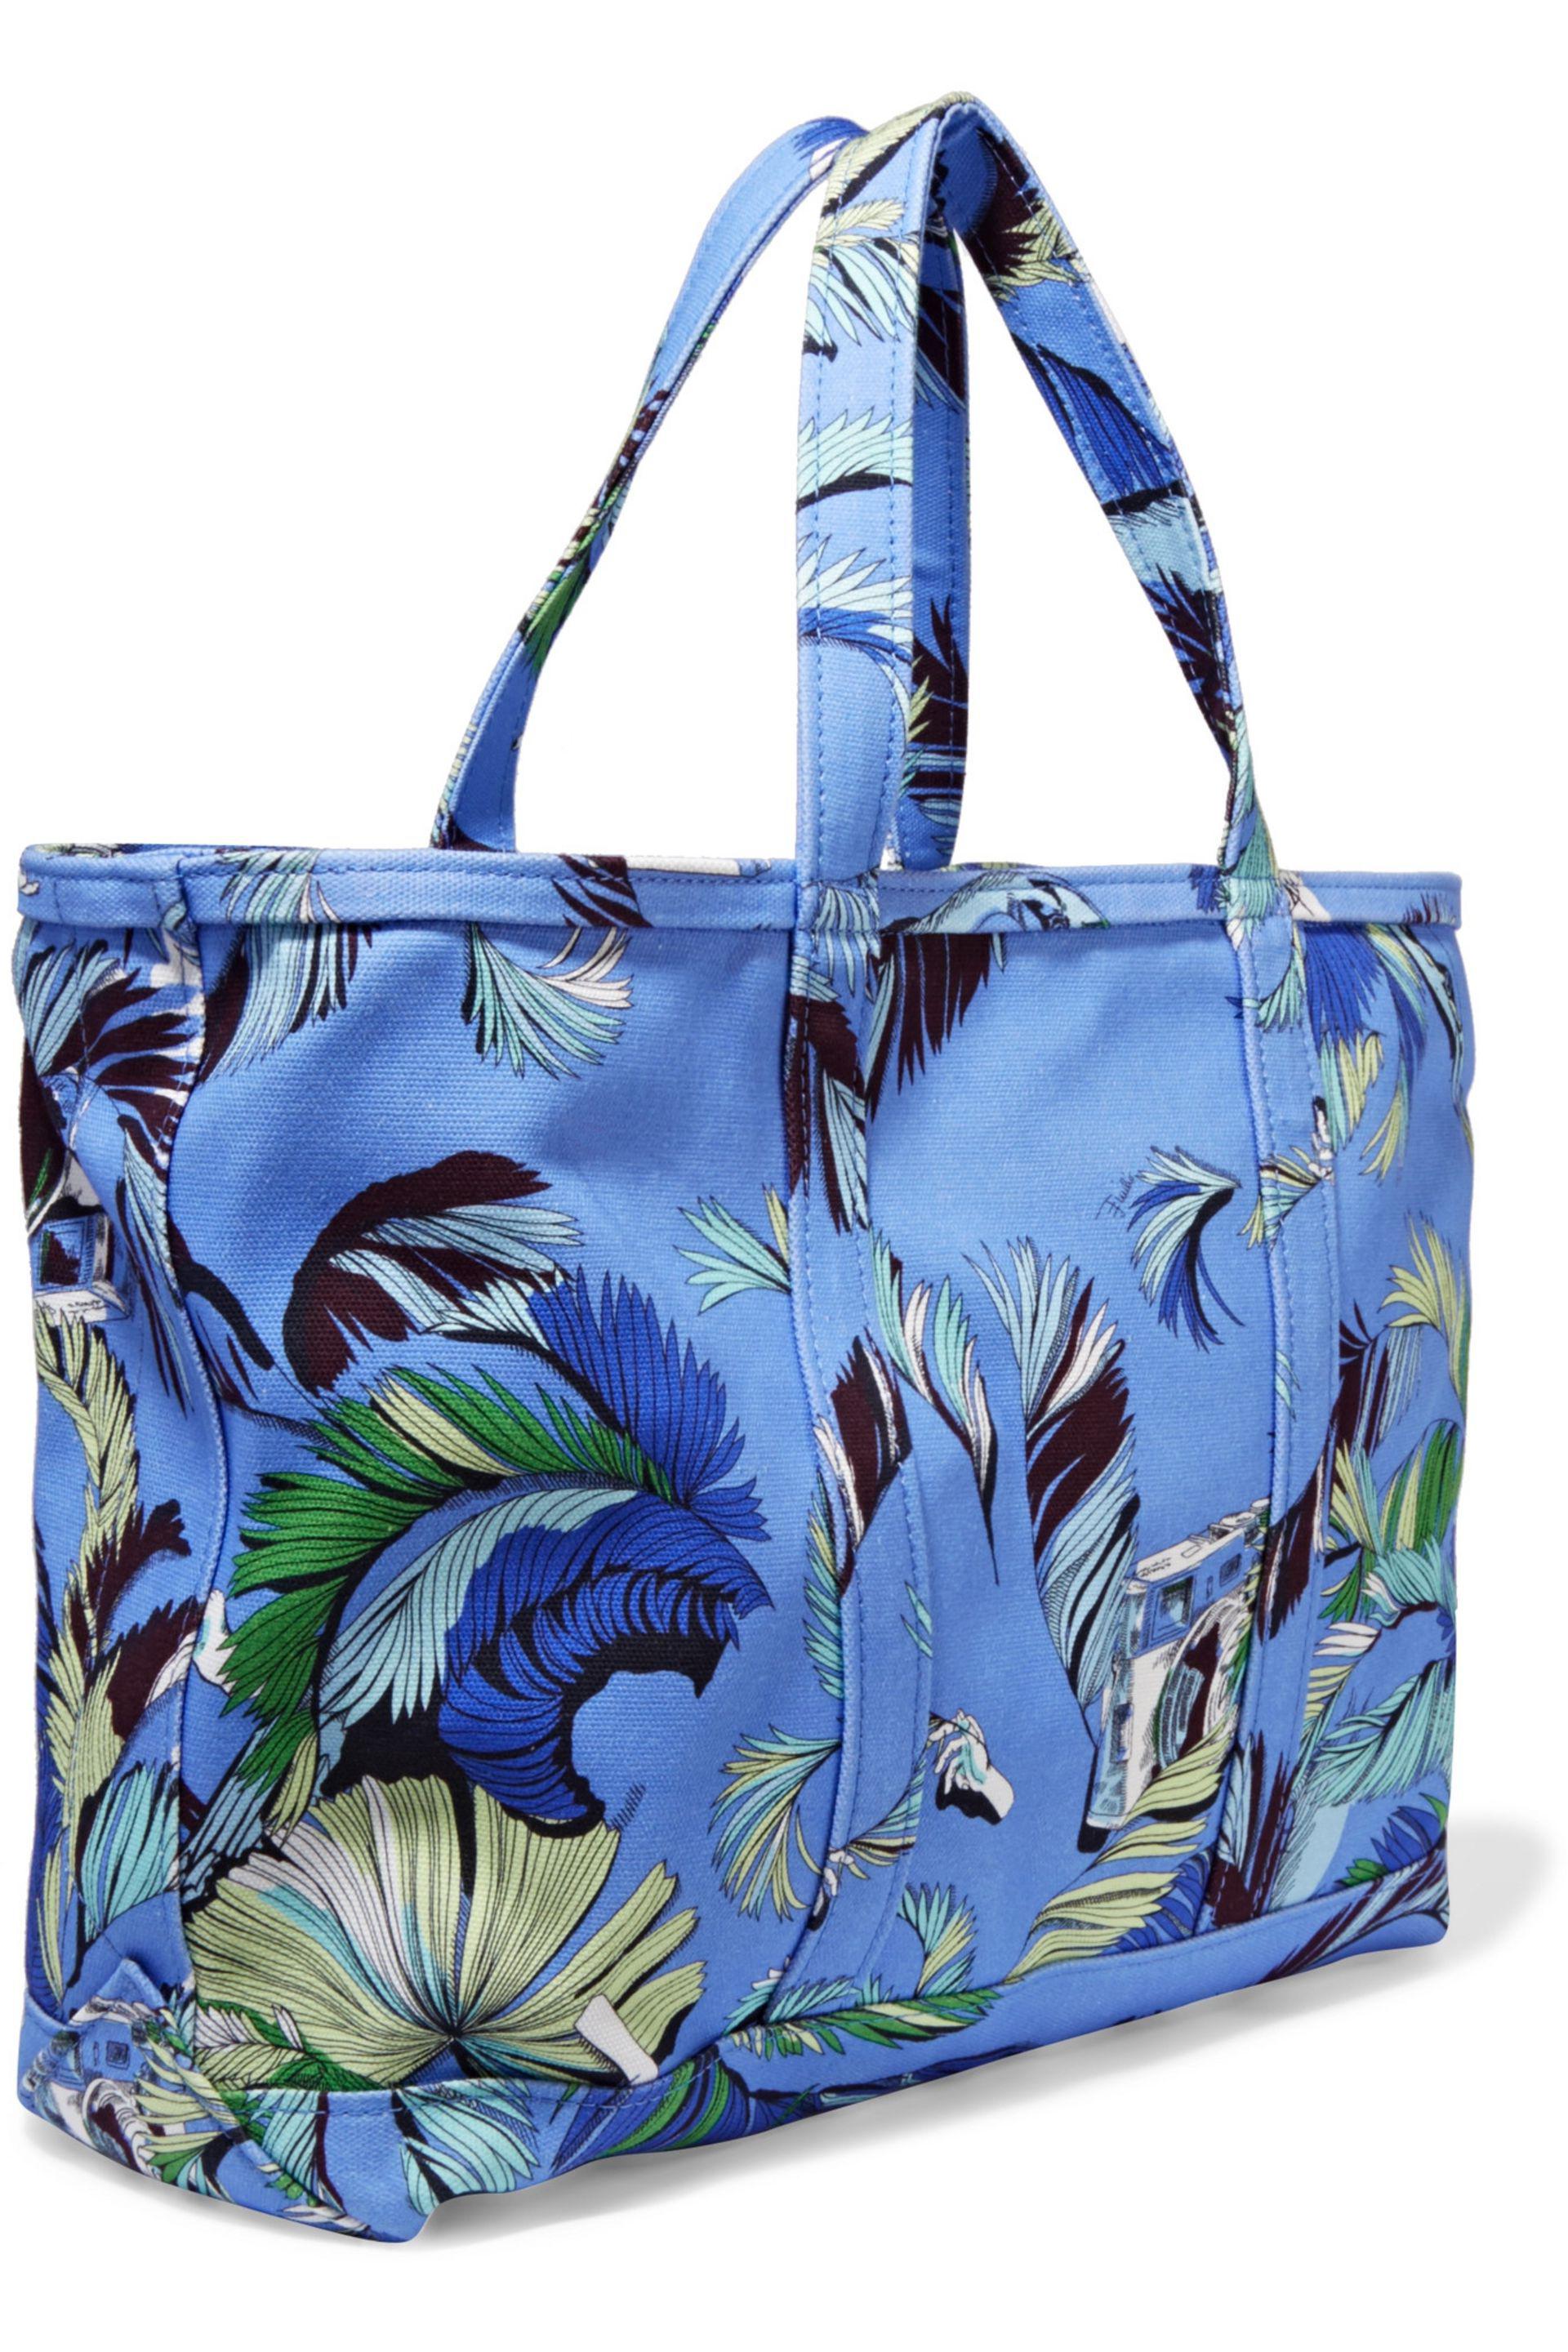 Emilio Pucci Leather-trimmed Printed Canvas Tote in Purple - Lyst